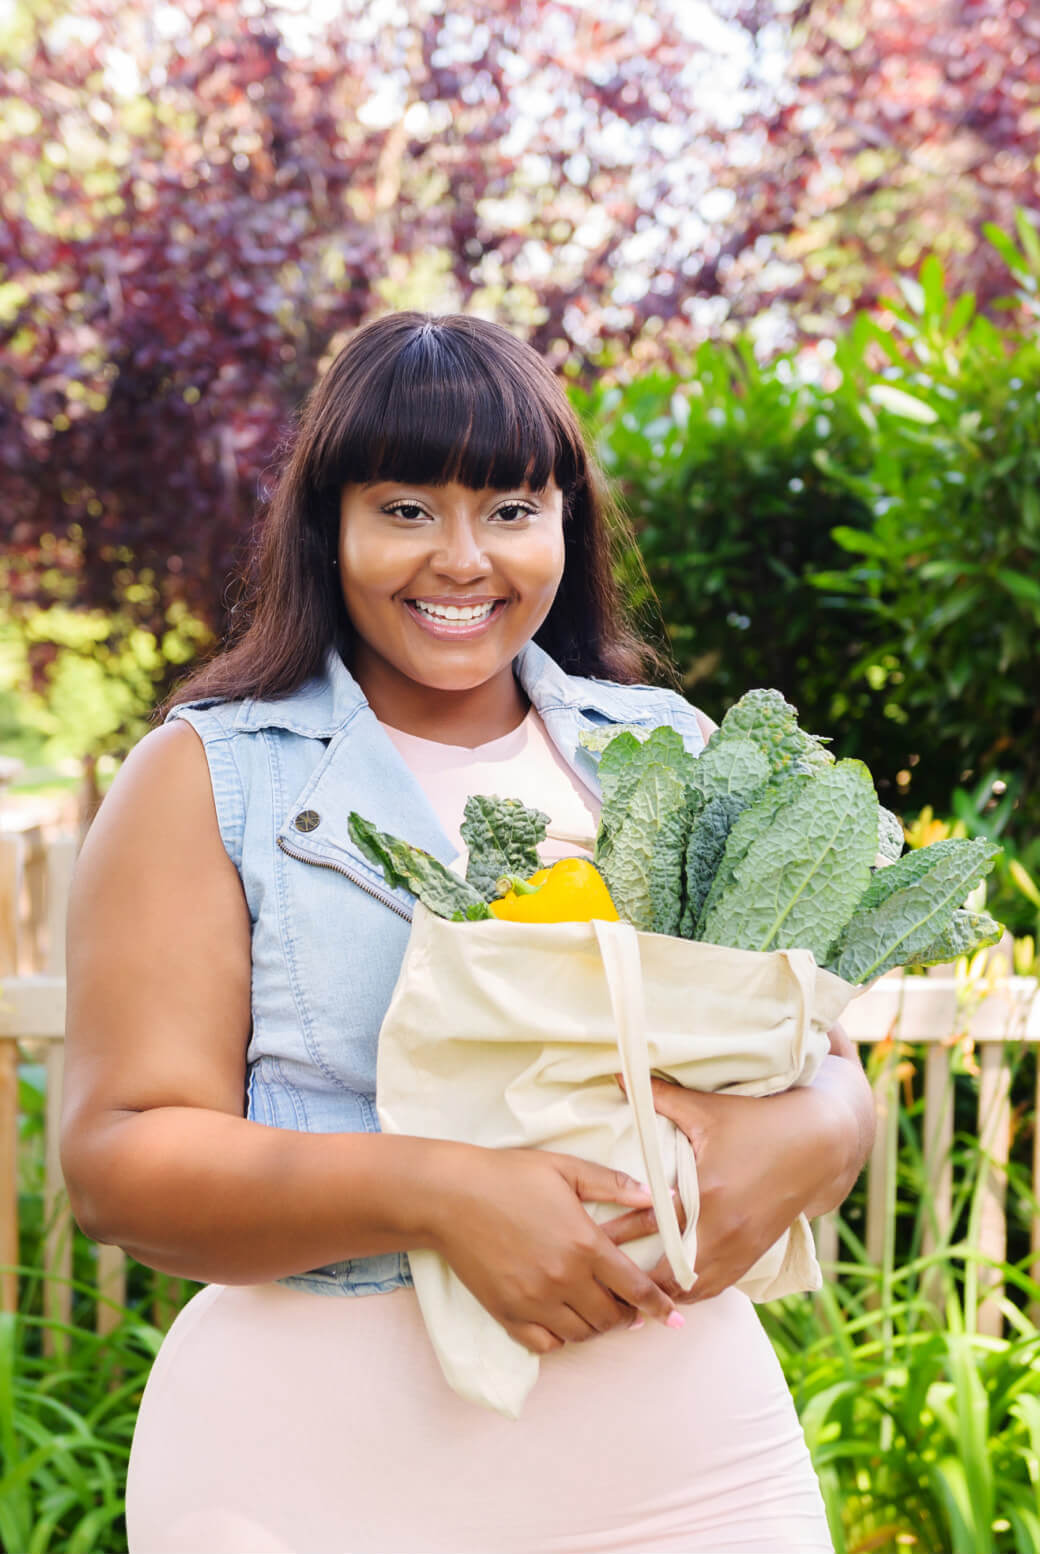 Young woman with long hair smiling while holding a grocery bag full of vegetables